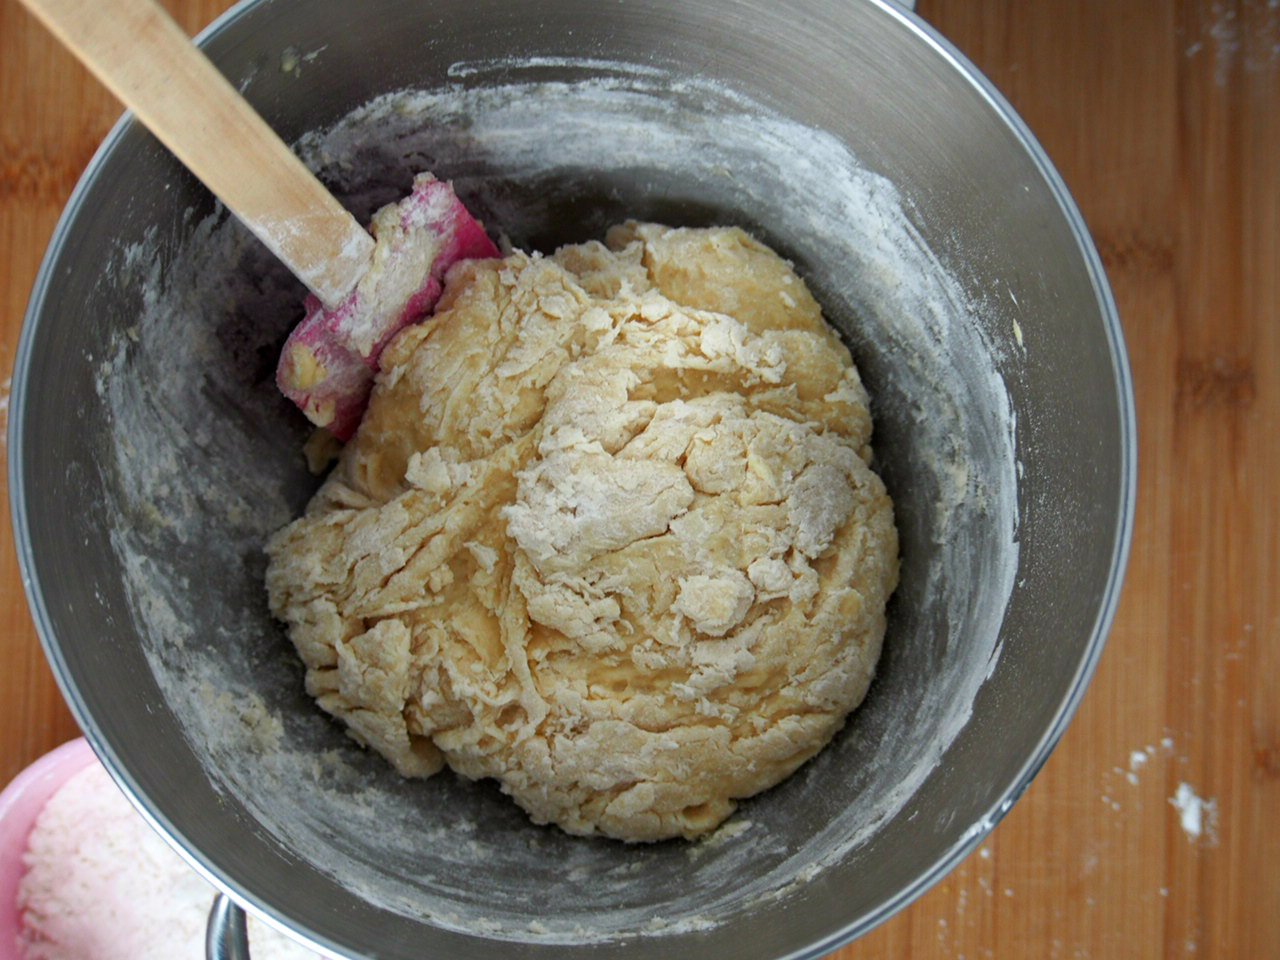 The dough of Pineapple buns in a mixing bowl.